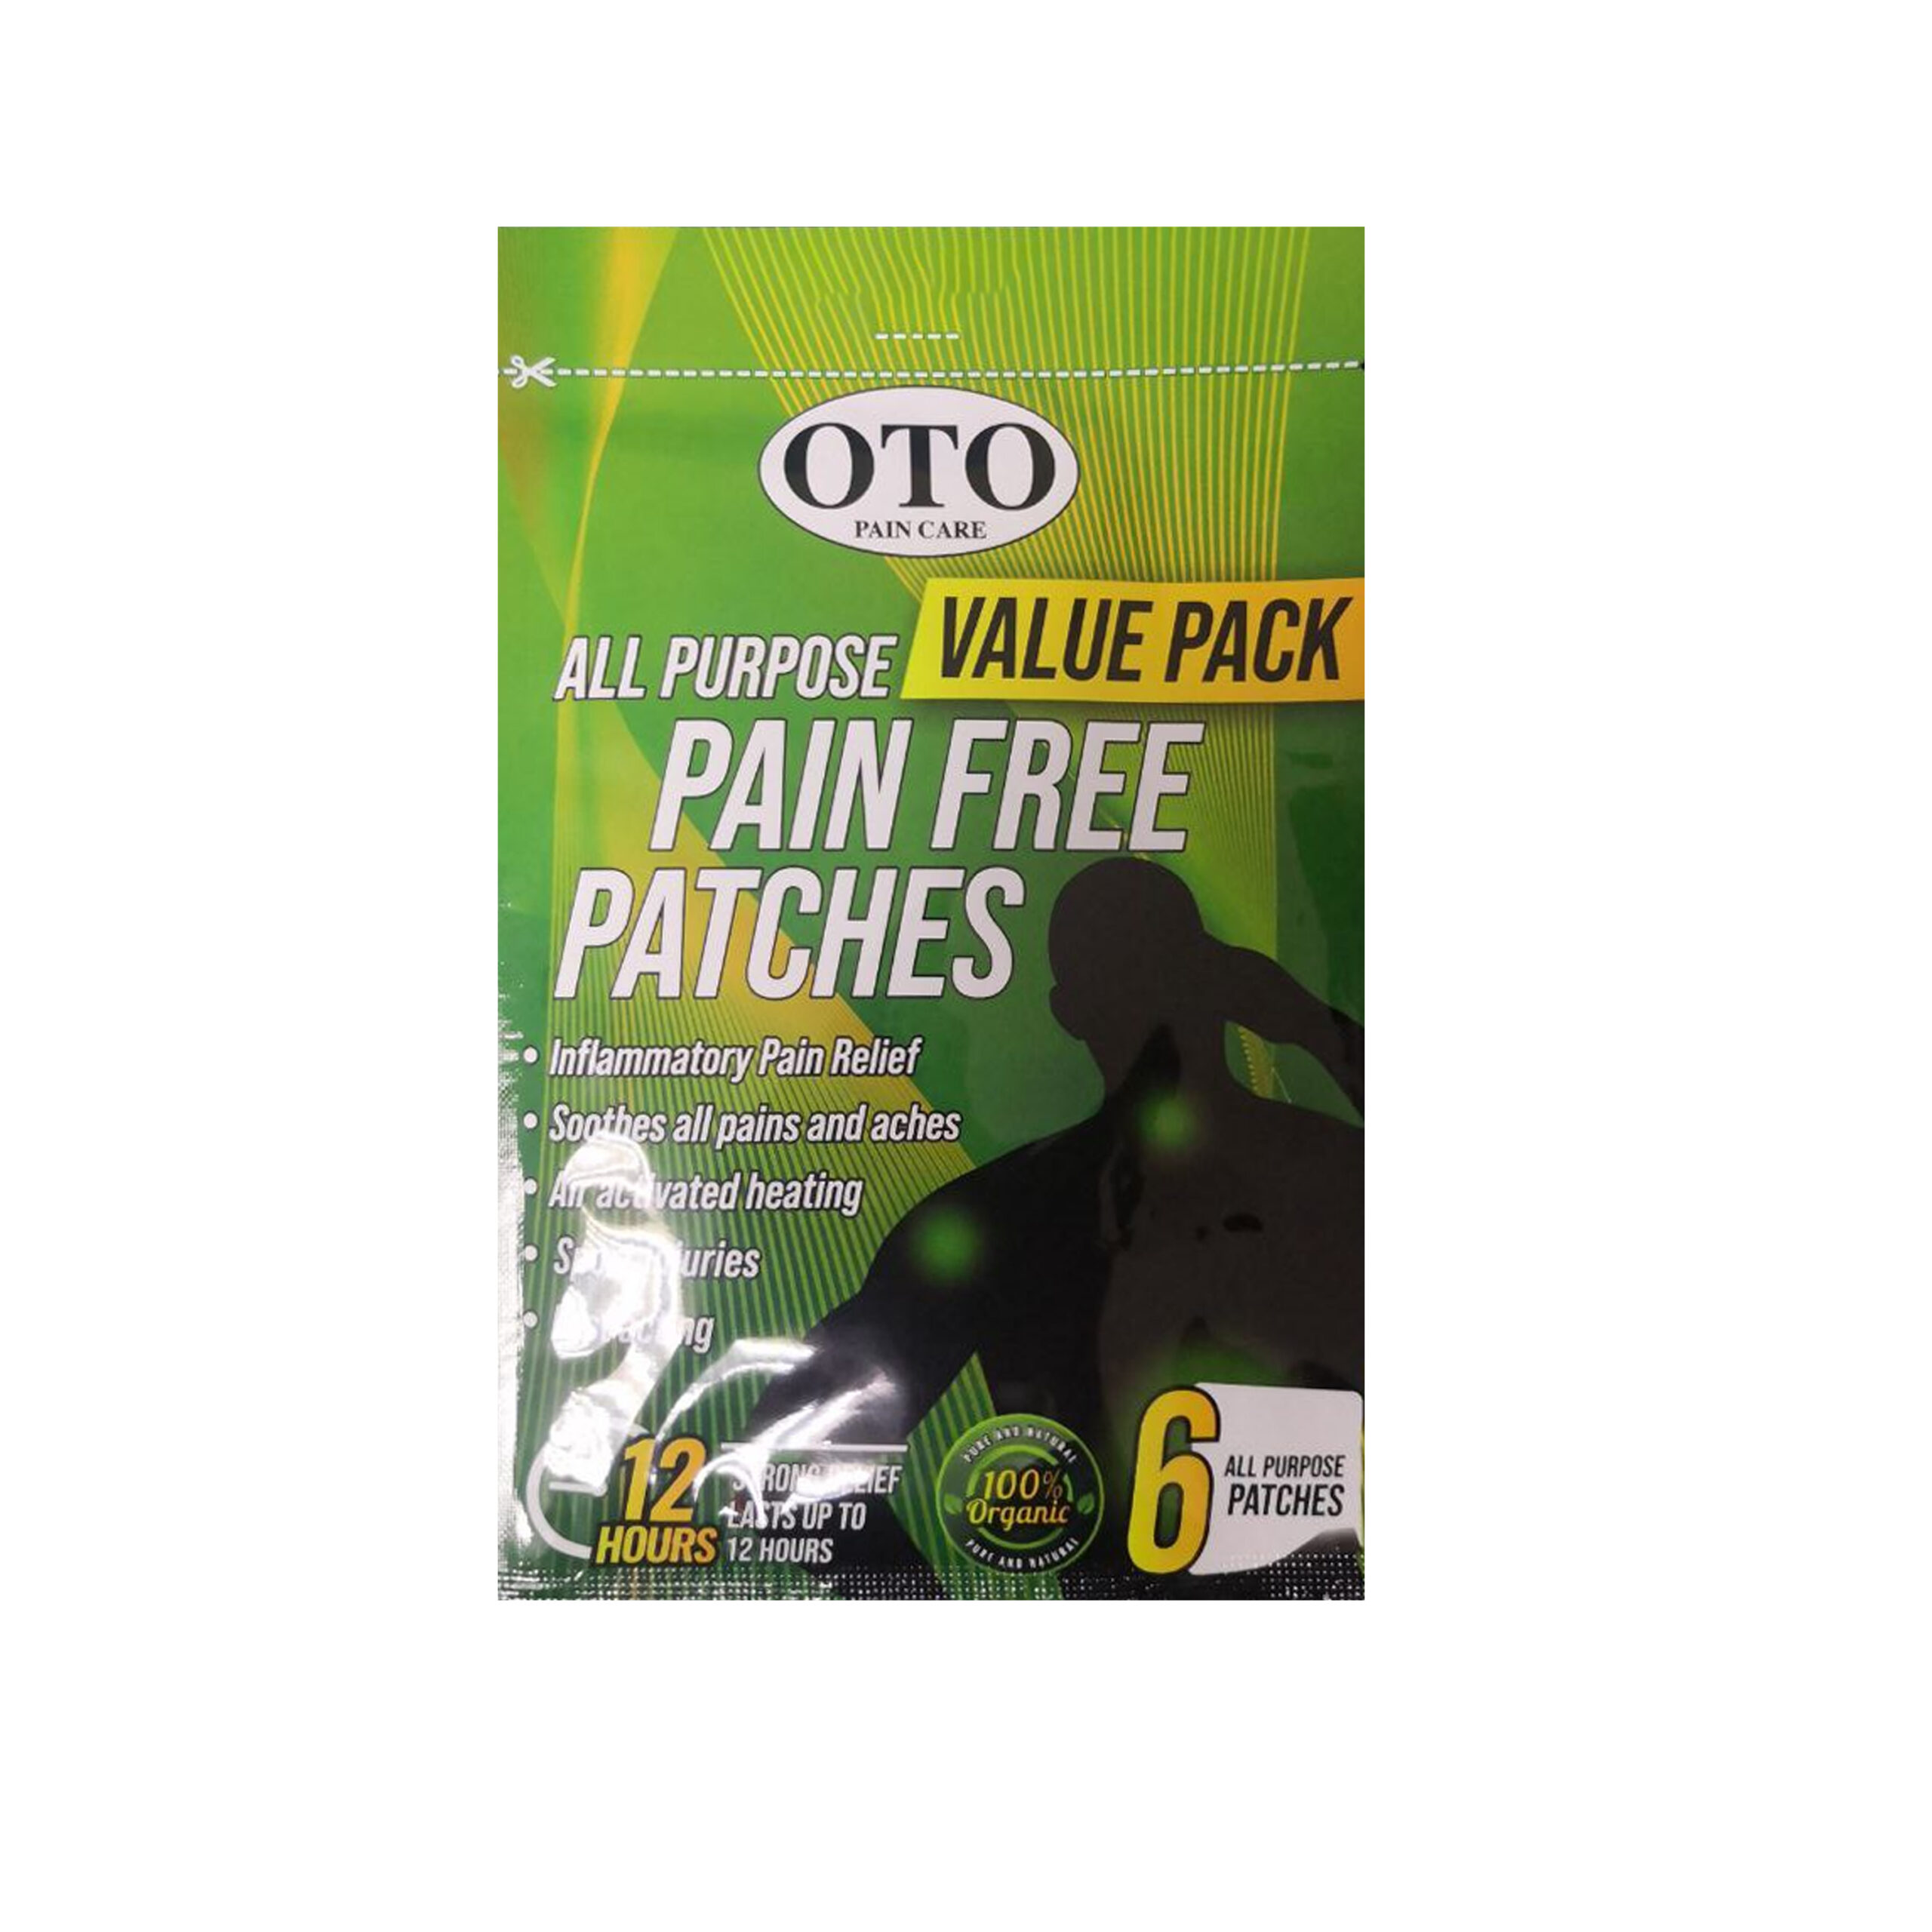 OTO ALL PURPOSE
PAIN FREE
PATCHES 6 PACK
(TBD)